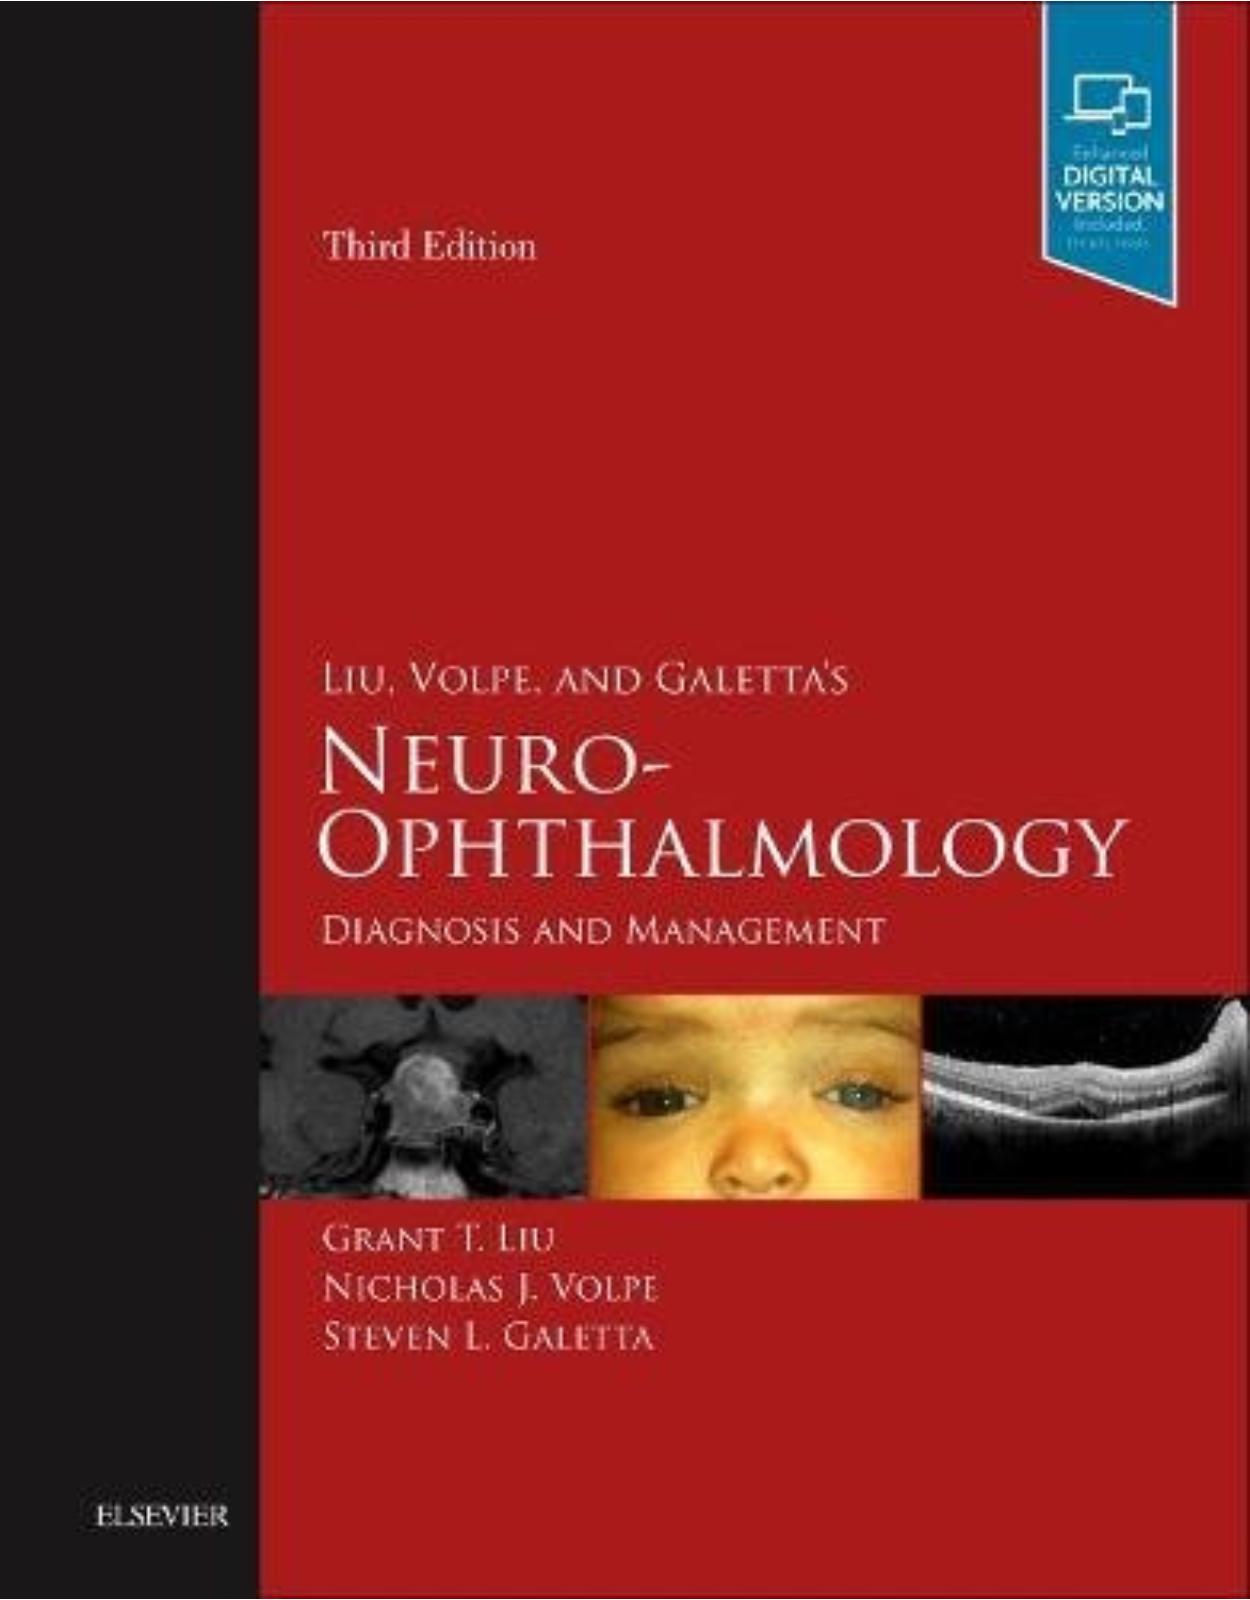 Liu, Volpe, and Galetta's Neuro-Ophthalmology: Diagnosis and Management, 3e